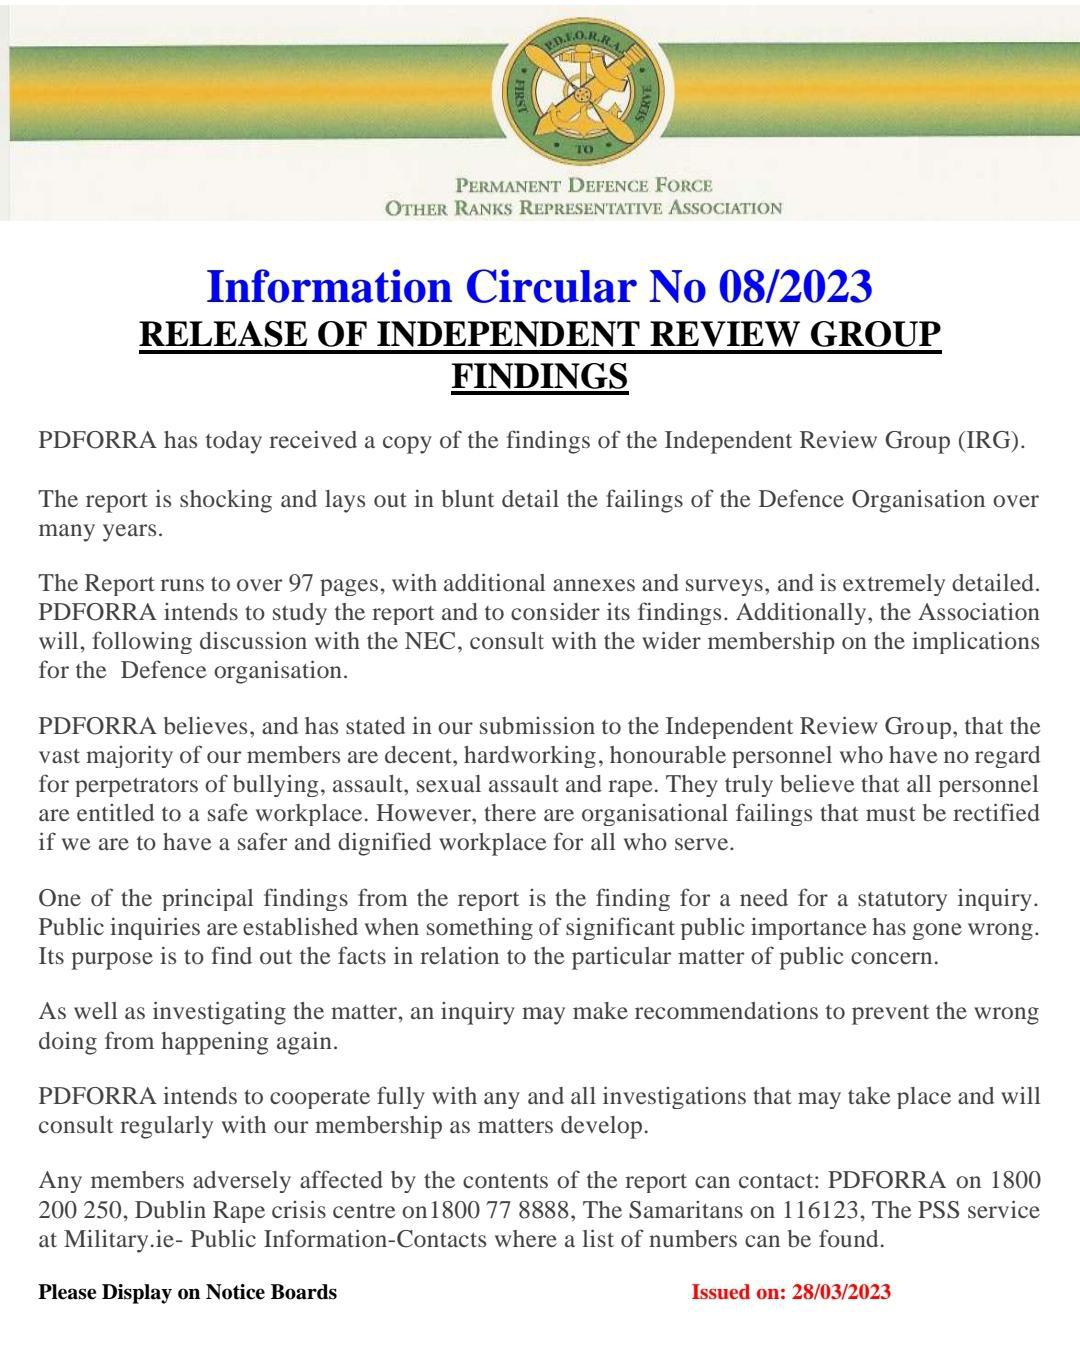 Information Circular No 08 of 23 - Release of IRG Report - Findings